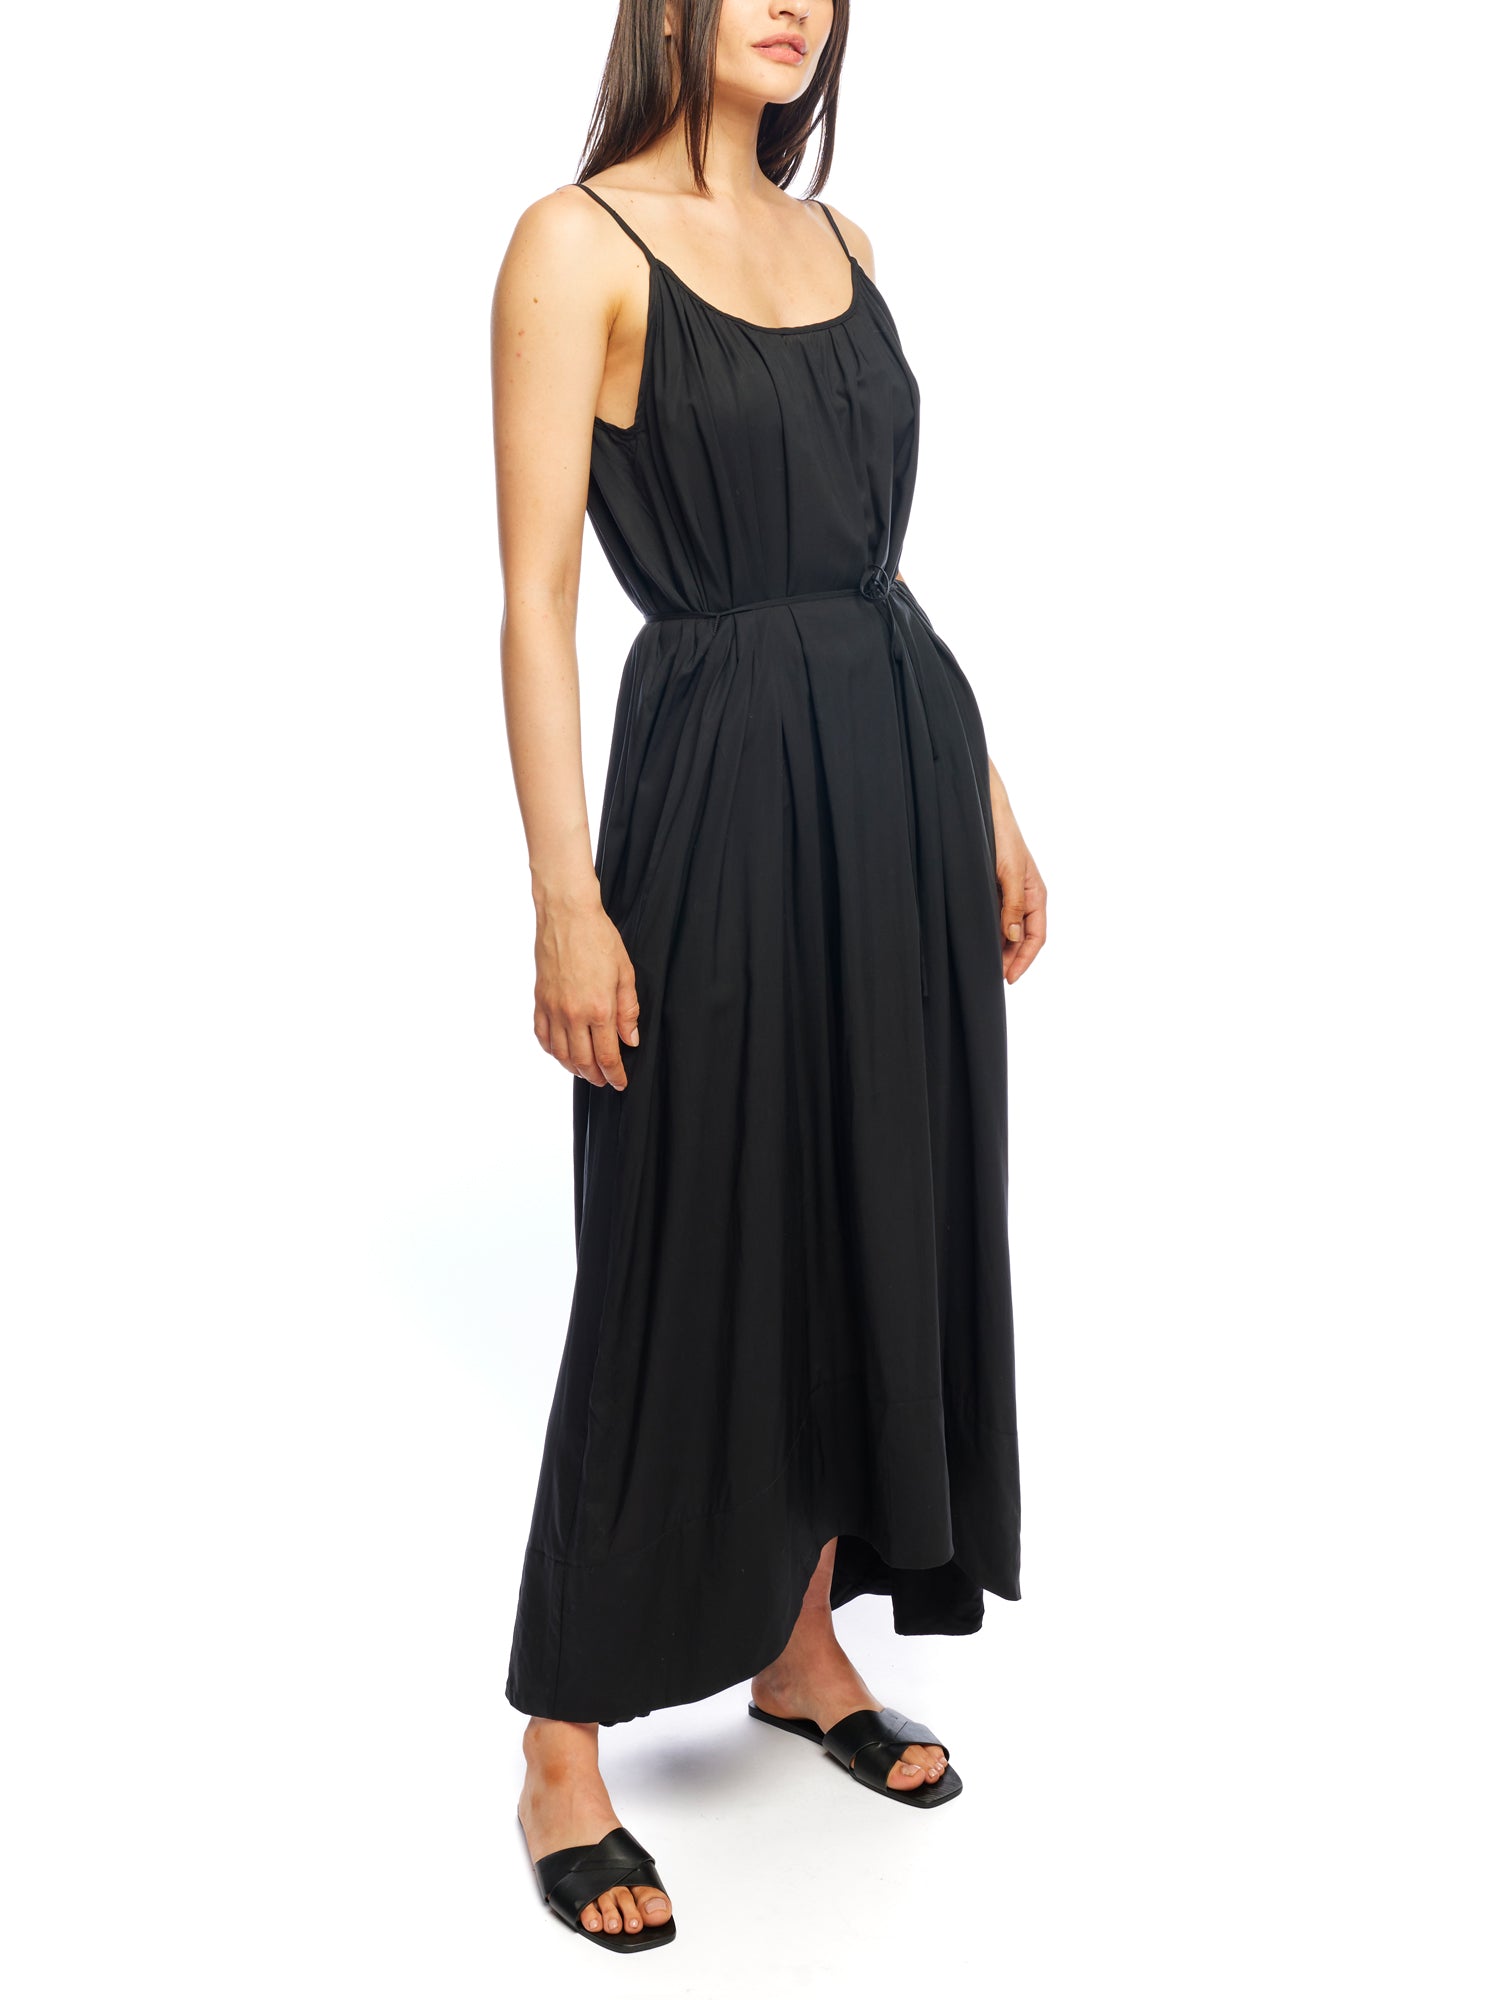 high low maxi dress with adjustable spaghetti straps, open, scoop back and removable tie in black